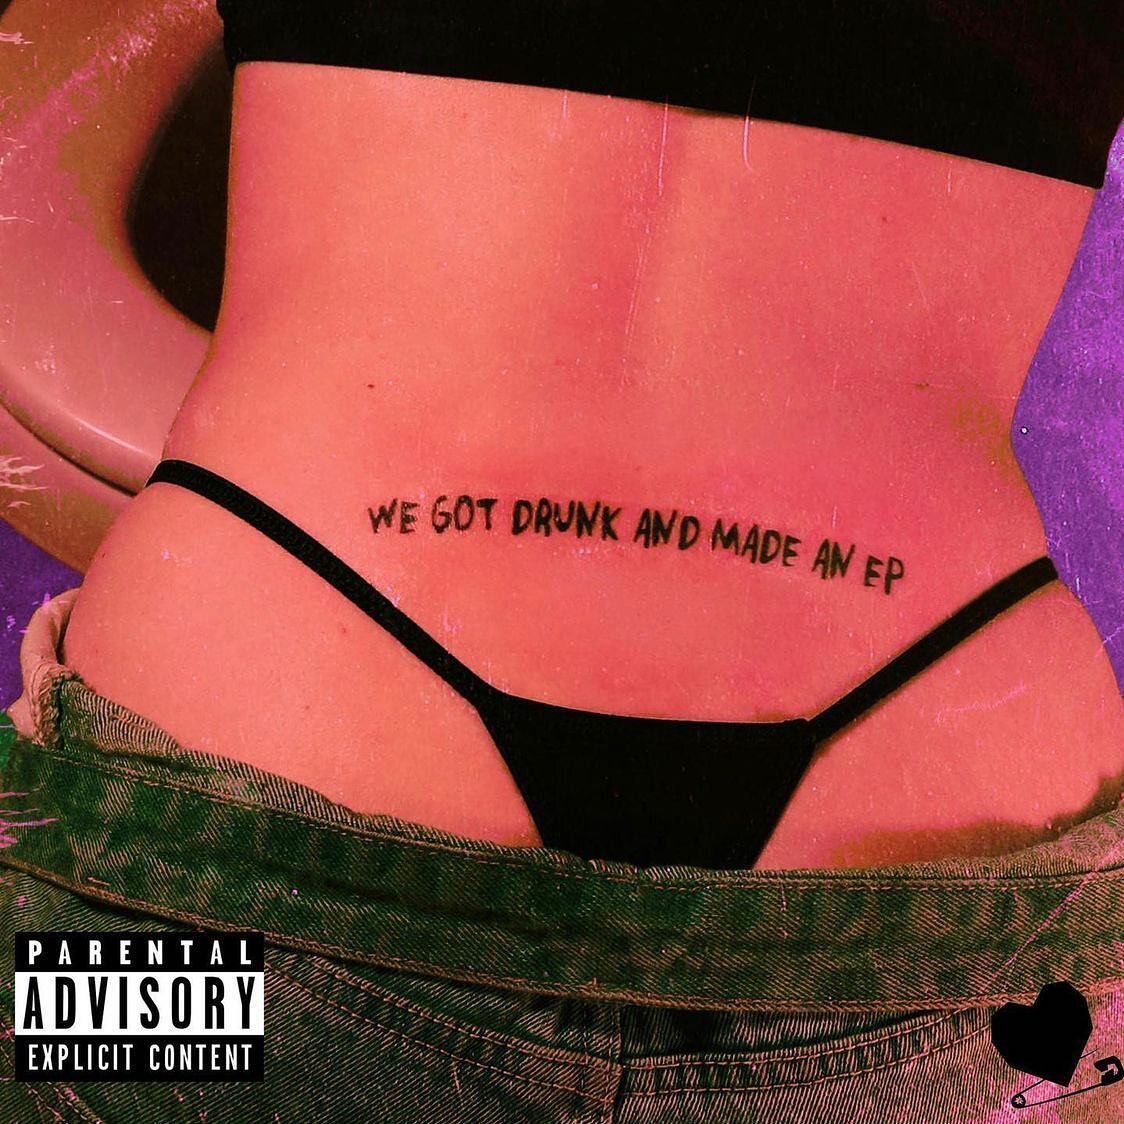 @trampstamps &ldquo;we got drunk and made an EP&rdquo; is out now! Co-produced and co-written by @paigeblue @carobaesucks @marisamaino #🙏🏼🙏🏼🙏🏼